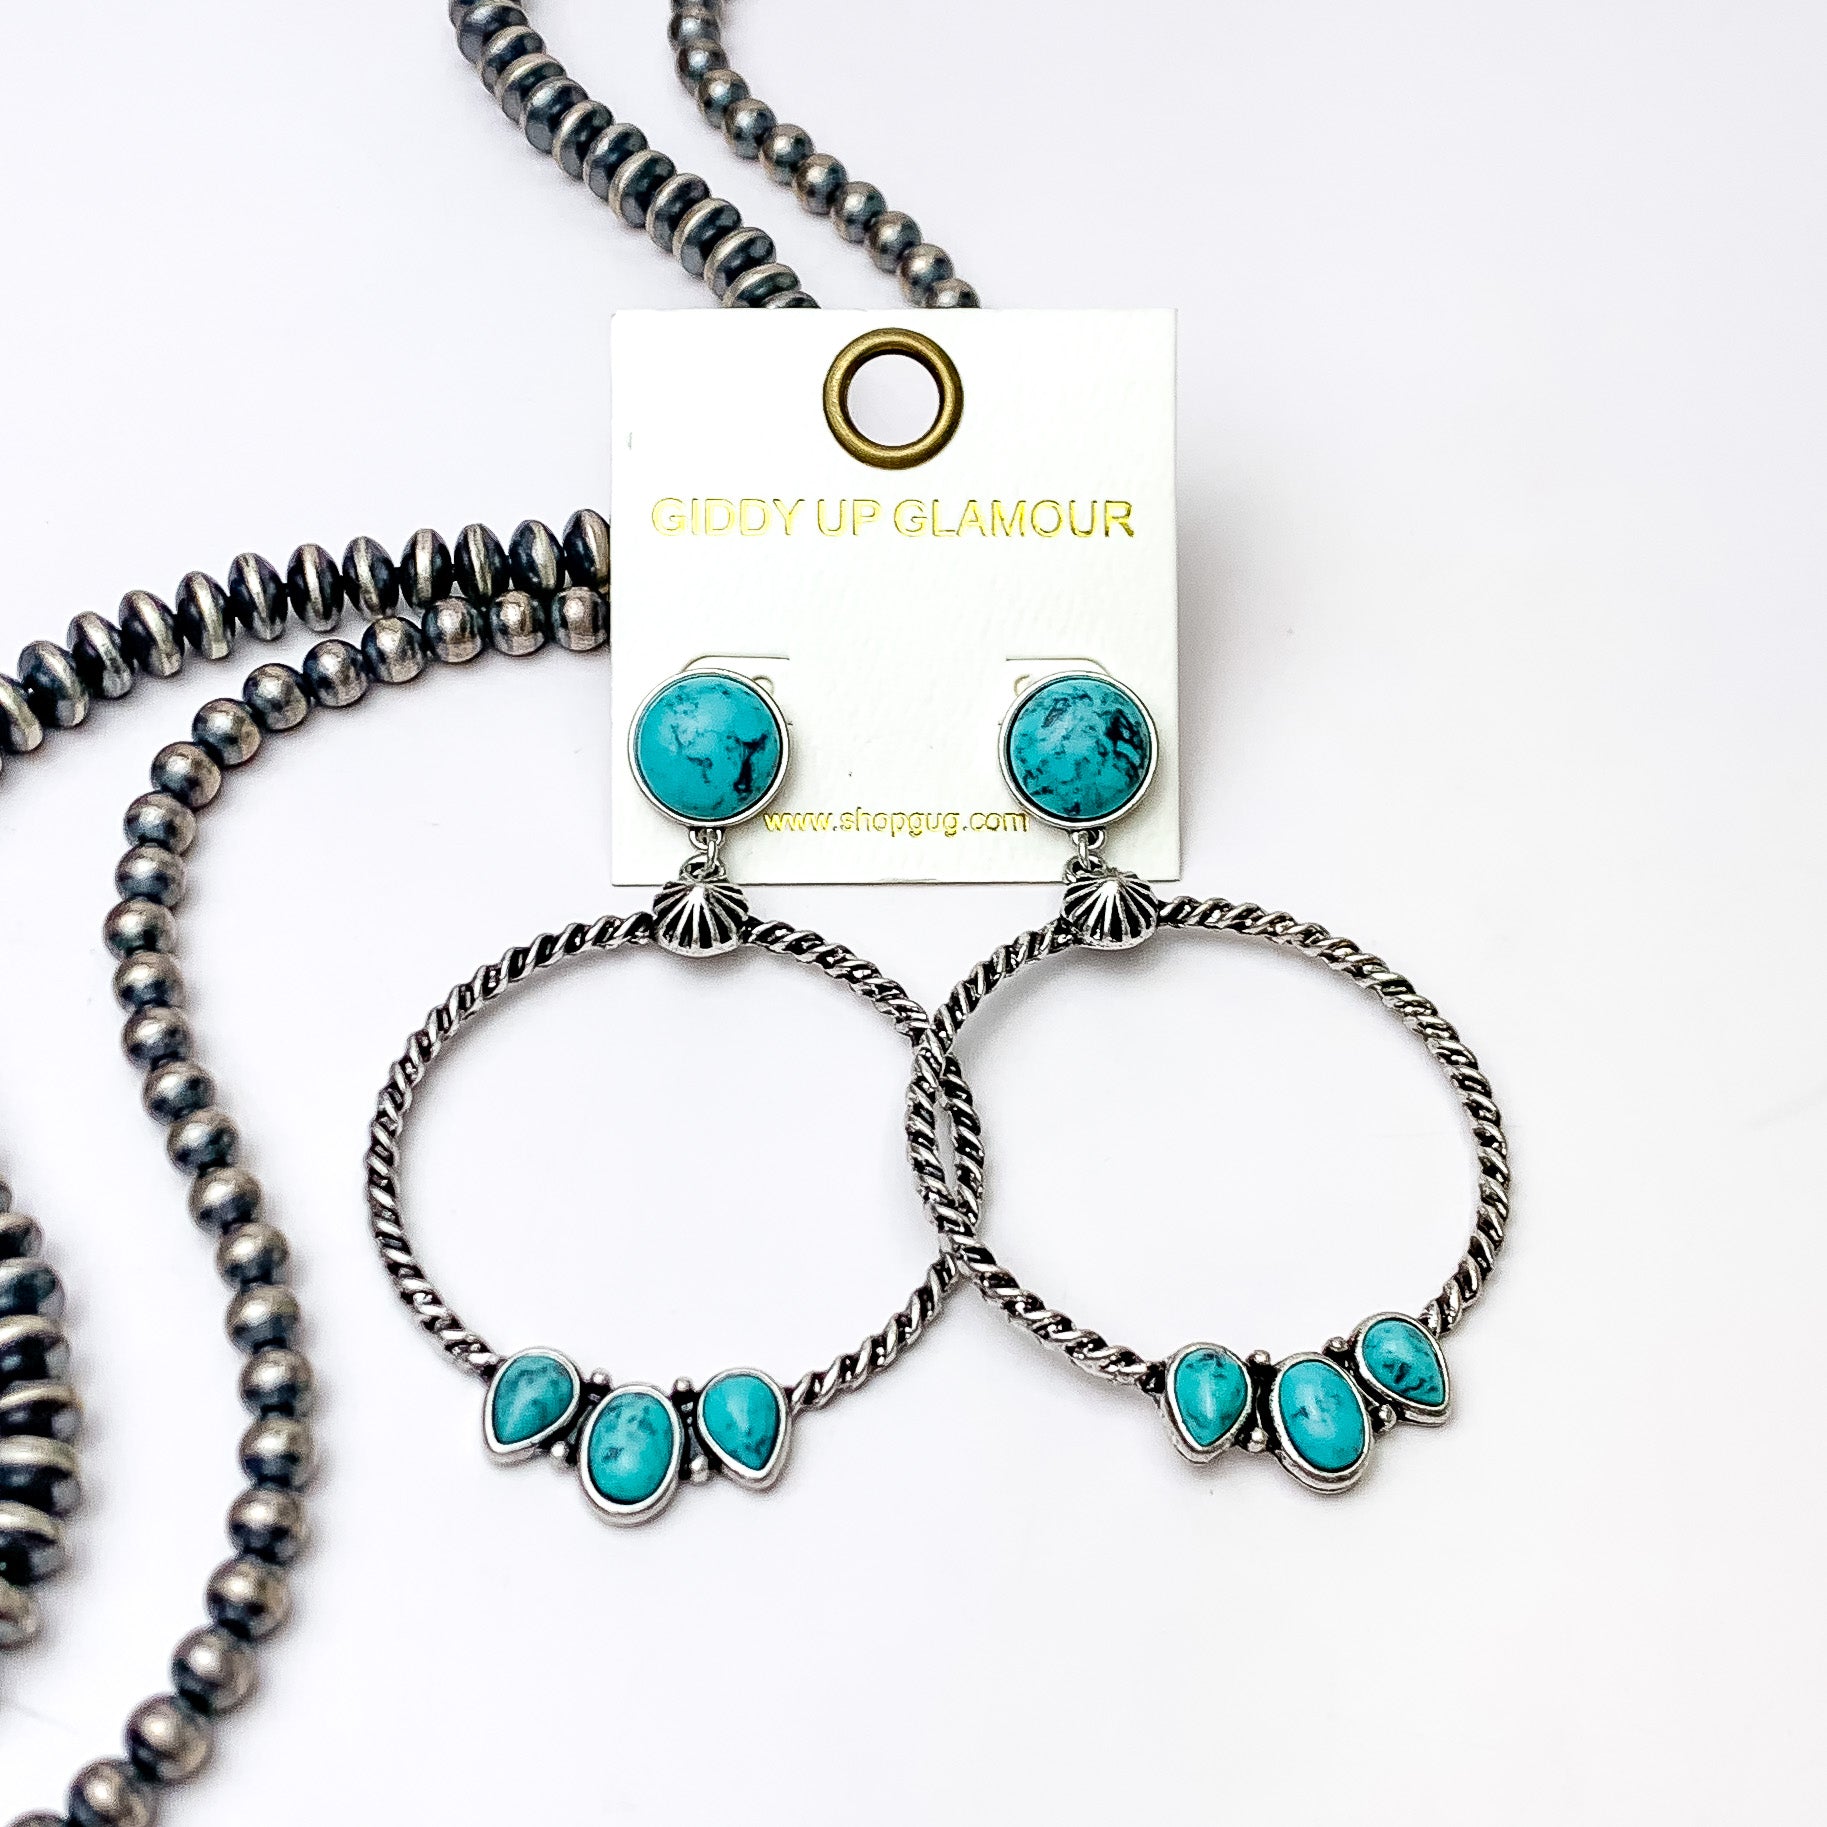 Circle, turquoise stone post earrings with a silver circle drop pendant. At the bottom of the circle there are three different shaped stones in turquoise. These earrings are pictured on a white background with silver beads on the left side bottom of the picture. 